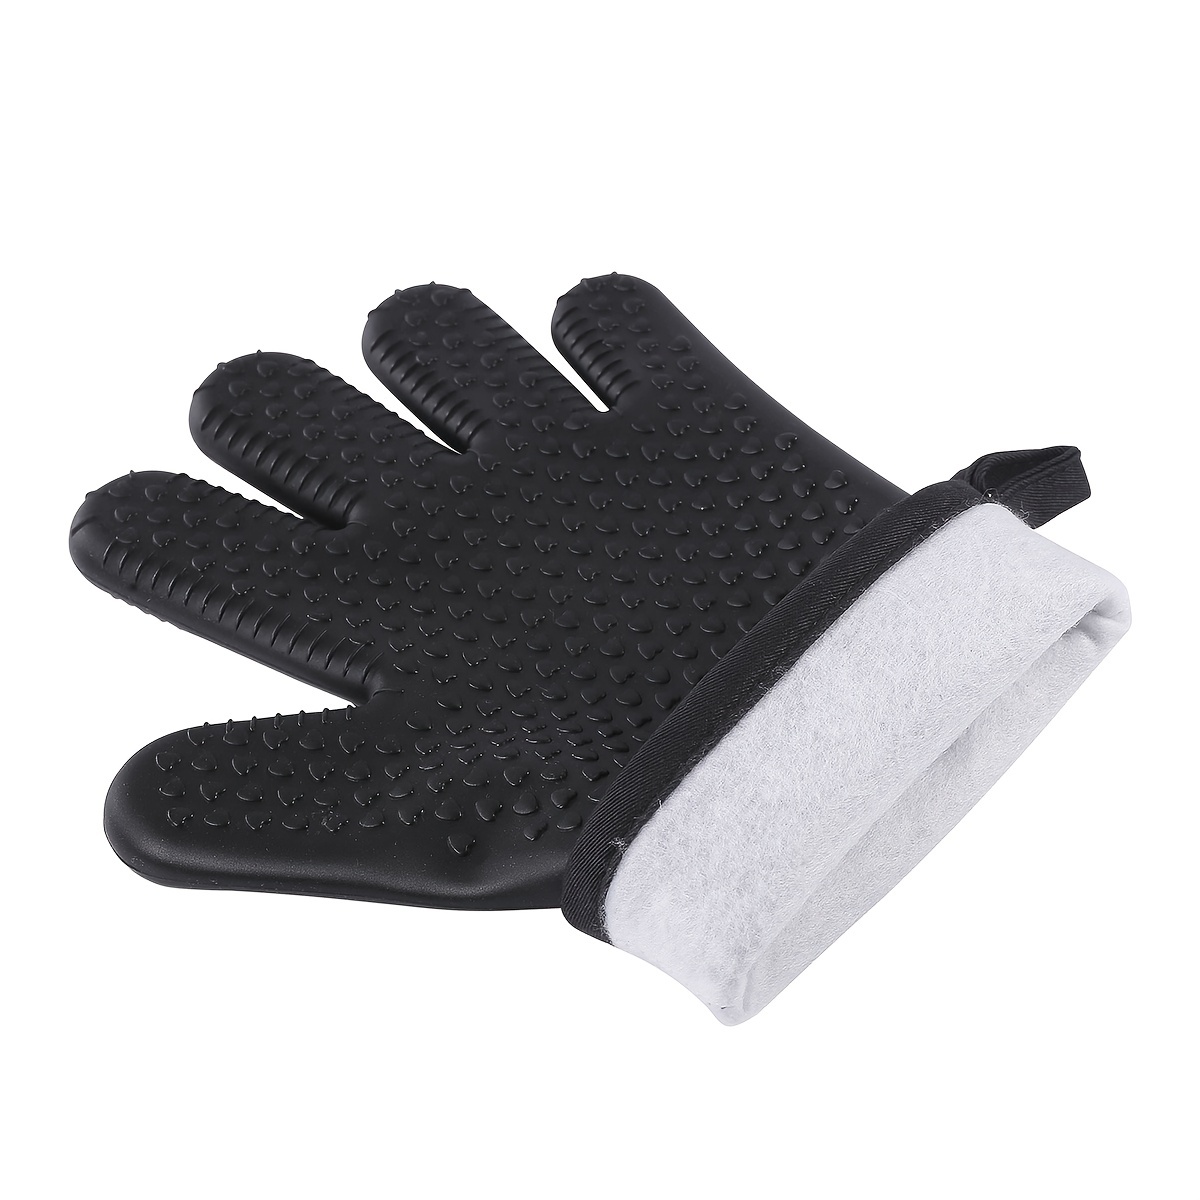 Heat Resistant Gloves Oven Gloves Heat Resistant with Fingers Oven Mitts Kitchen Pot Holders Cotton Gloves Kitchen Gloves Double Oven Gloves with